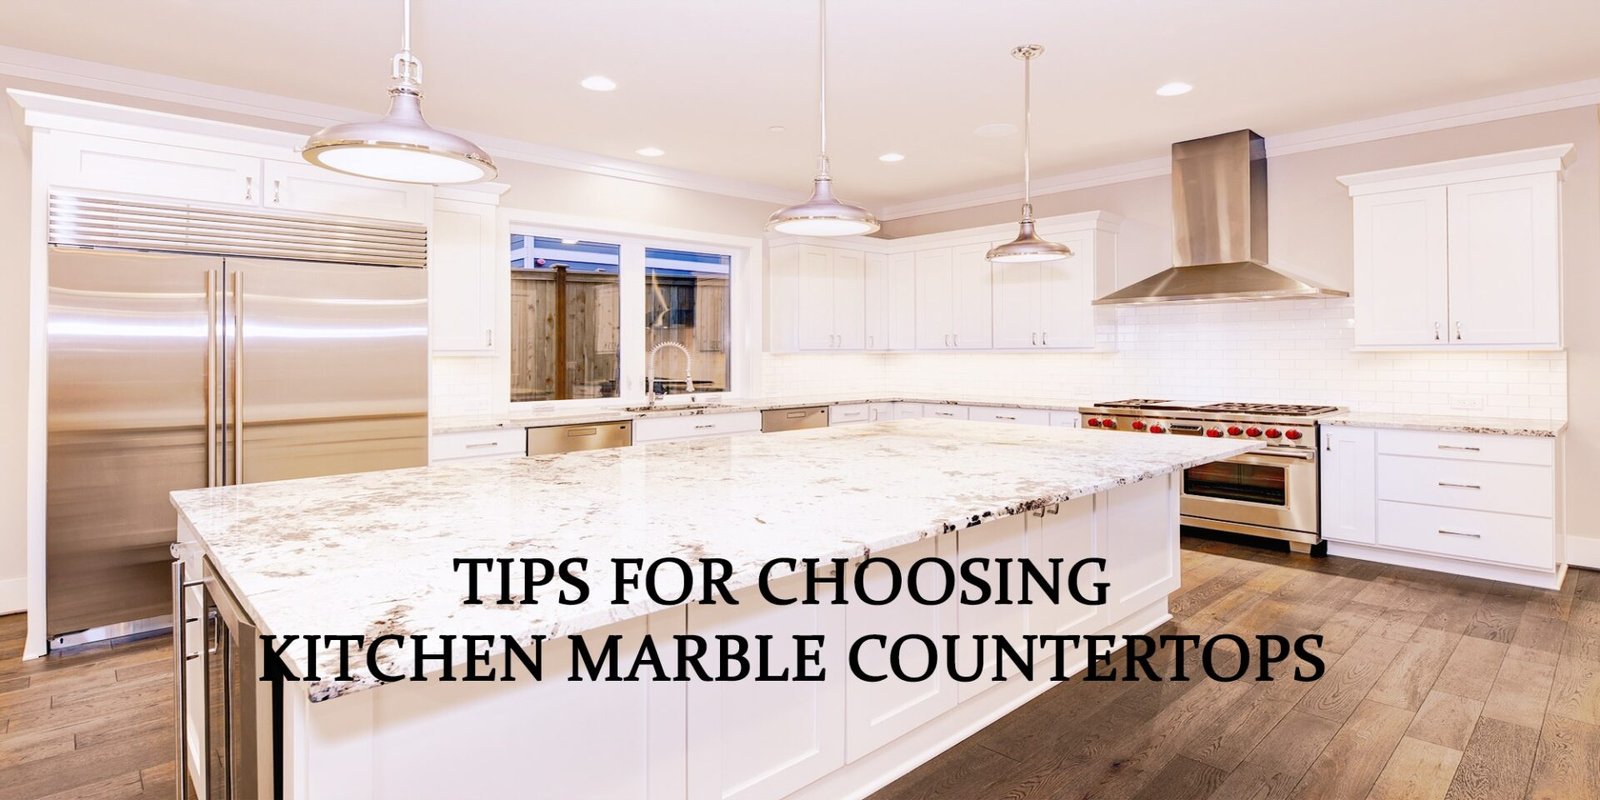 Tips for Choosing Kitchen Marble Countertops